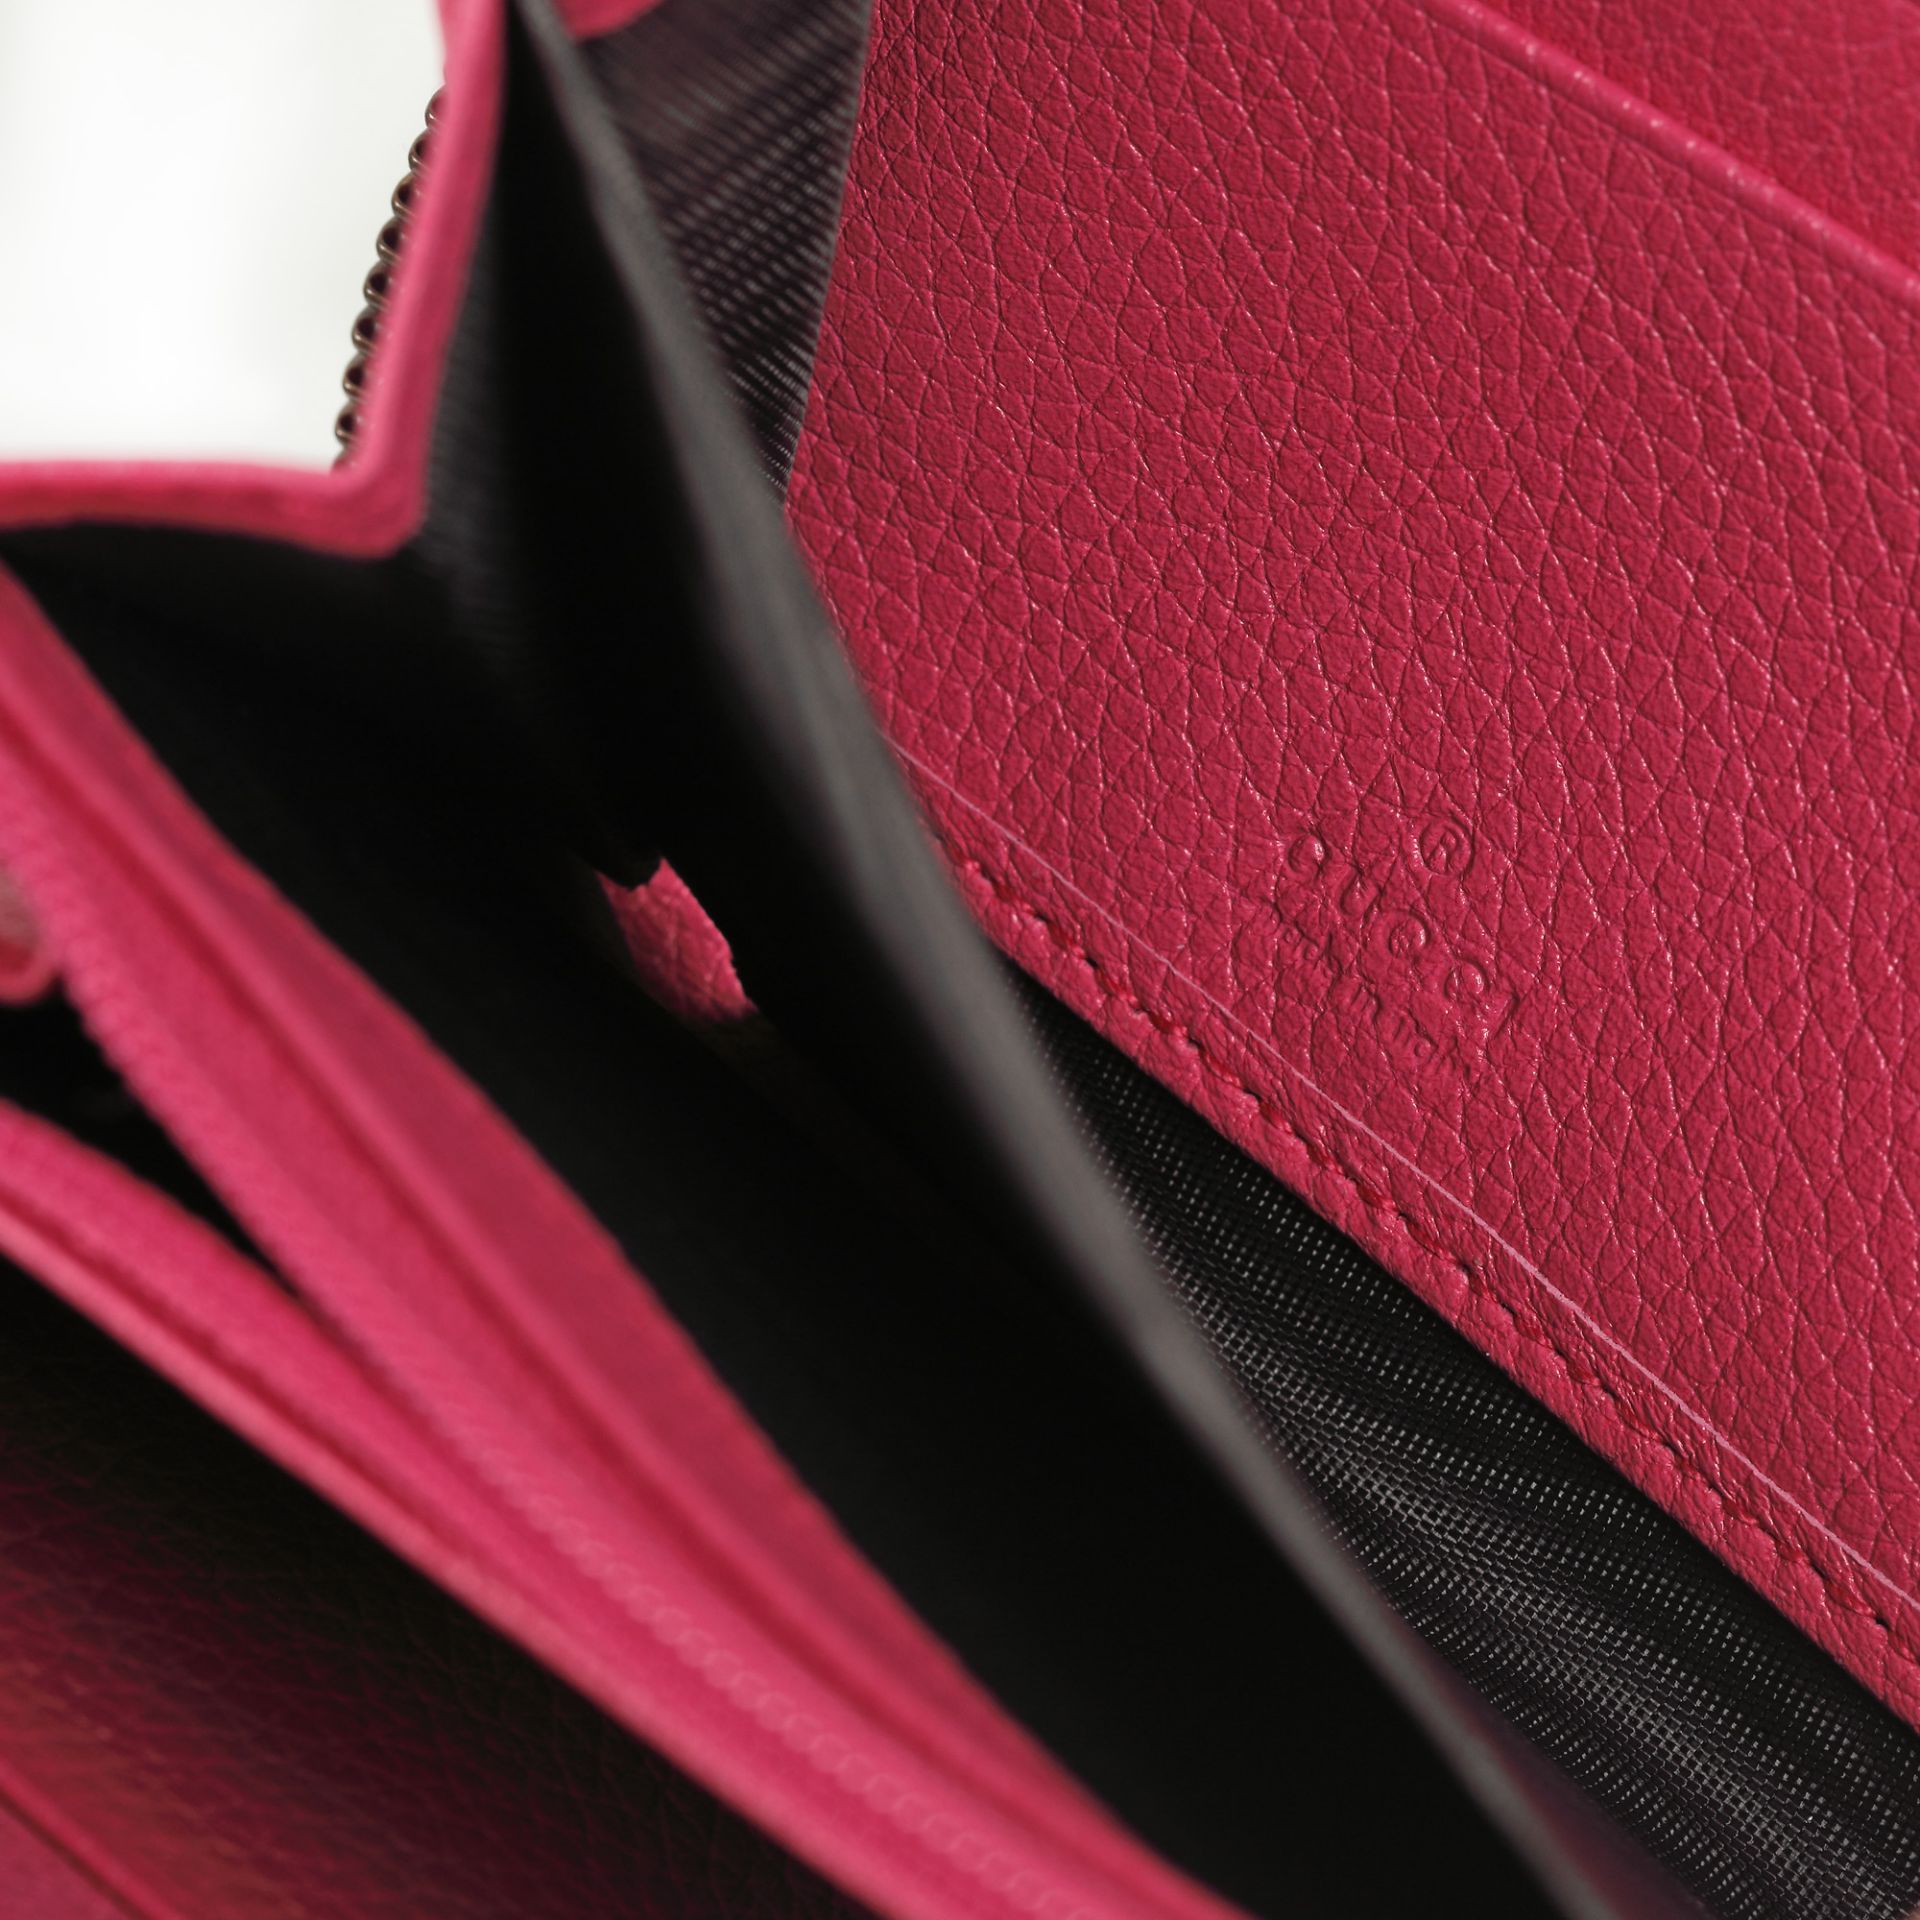 "Wallet GG" - Gucci wallet, leather, pink - Image 4 of 4